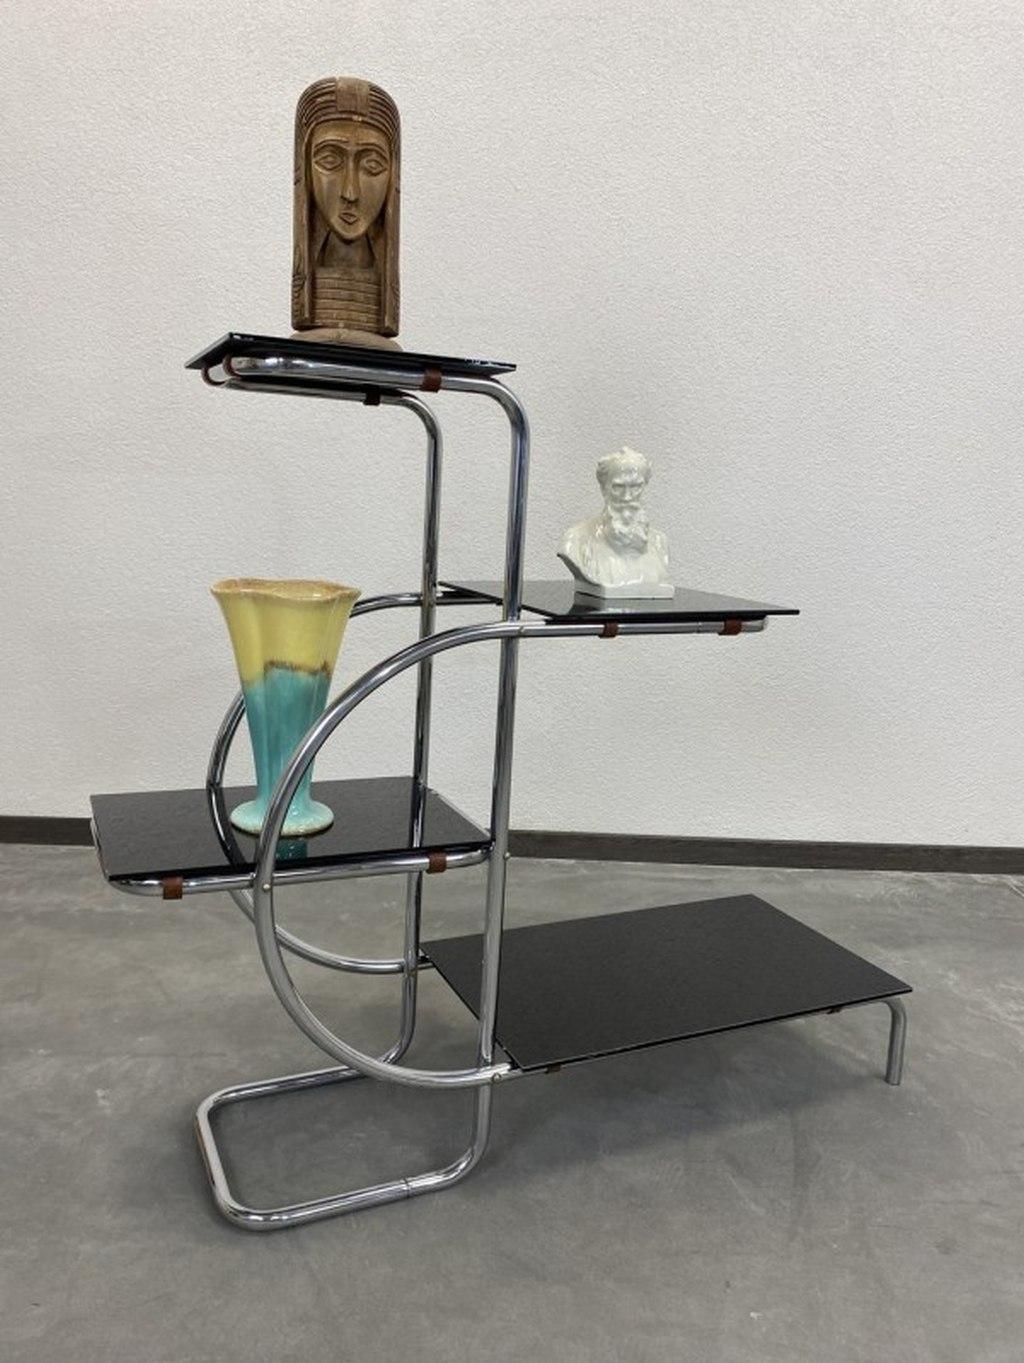 Functionalist steel plant stand by Emile Guyot with black glass. Very good original condition with signs of usage.